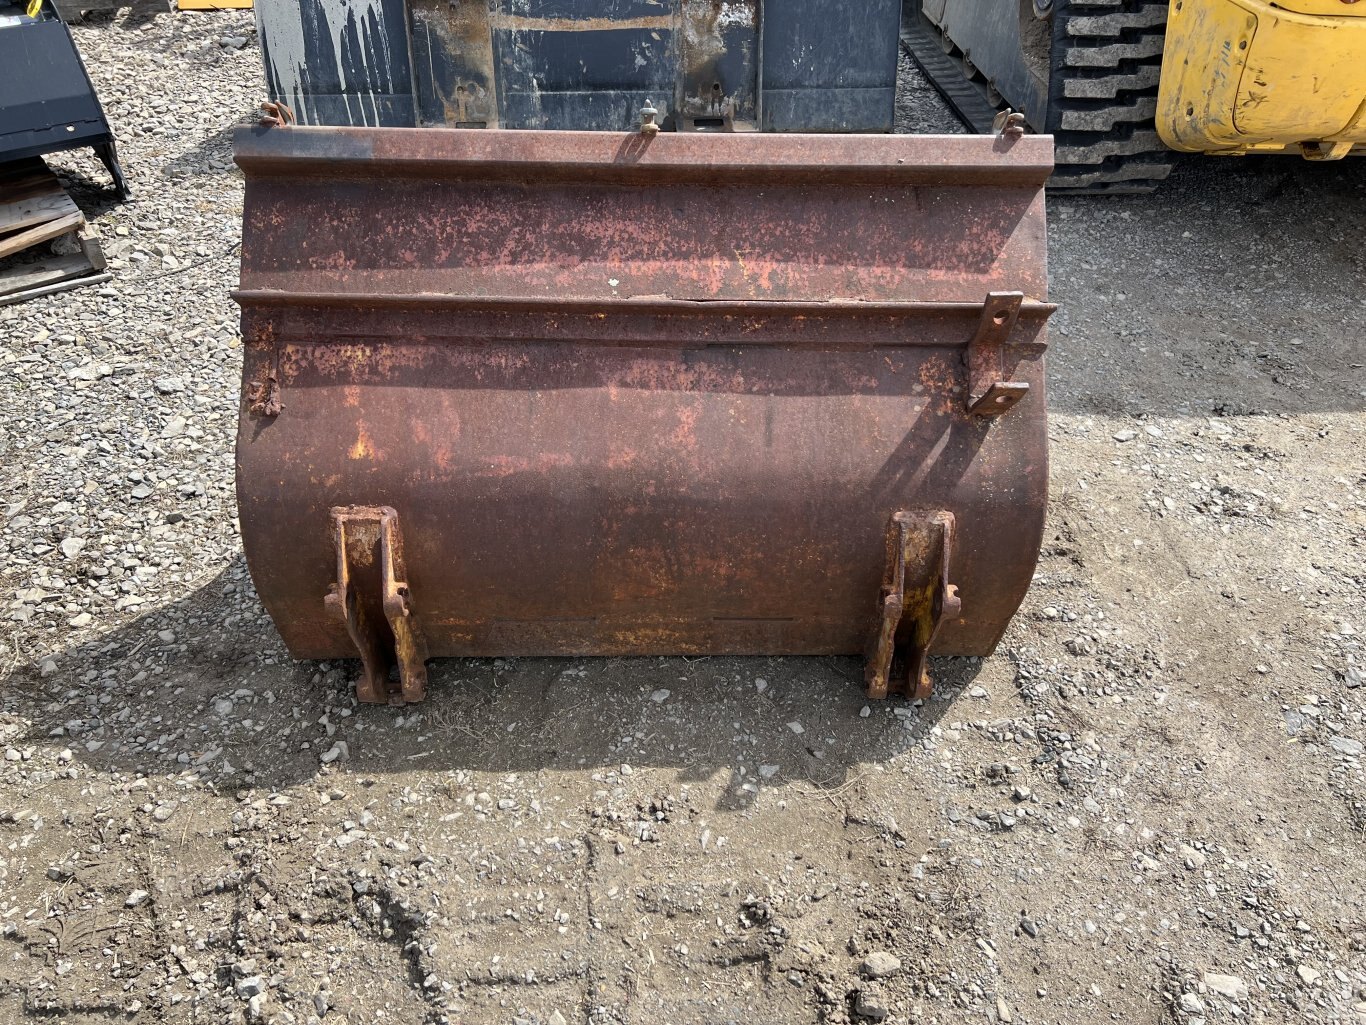 Used bucket for Sale